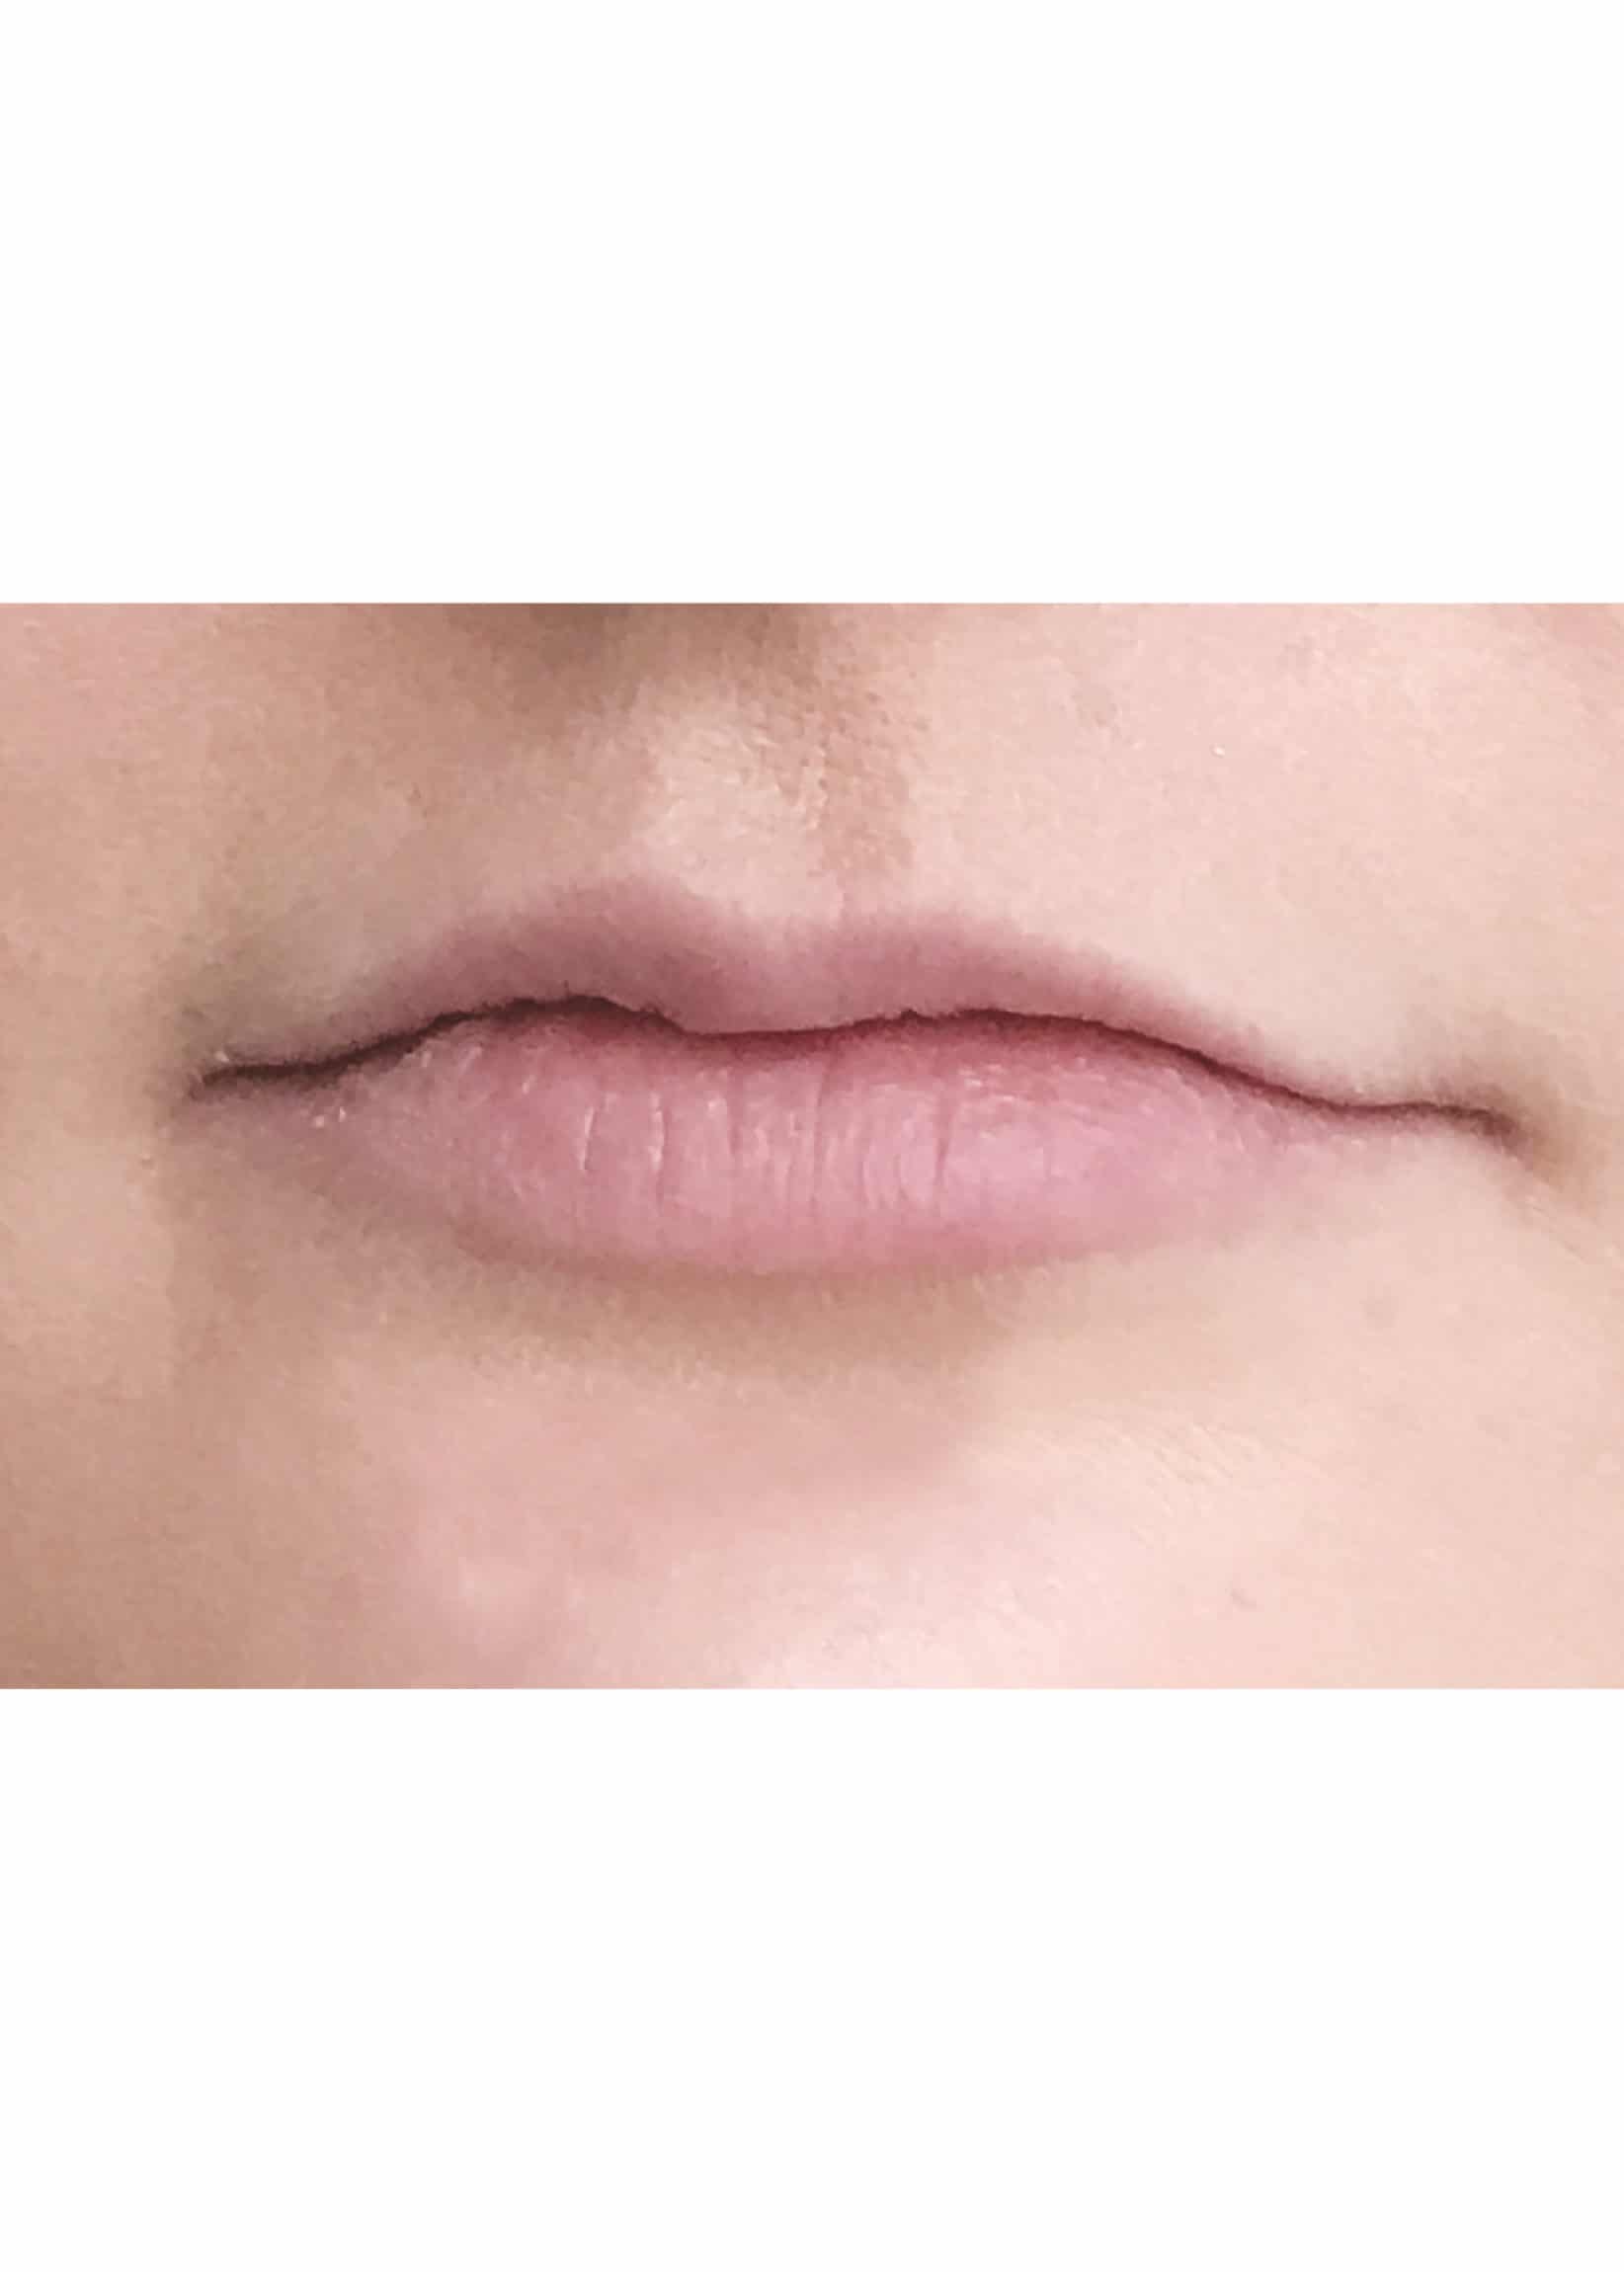 TheSkinCenter ProviderPages TiffaneyBeddow LipFiller Before 4 scaled 1